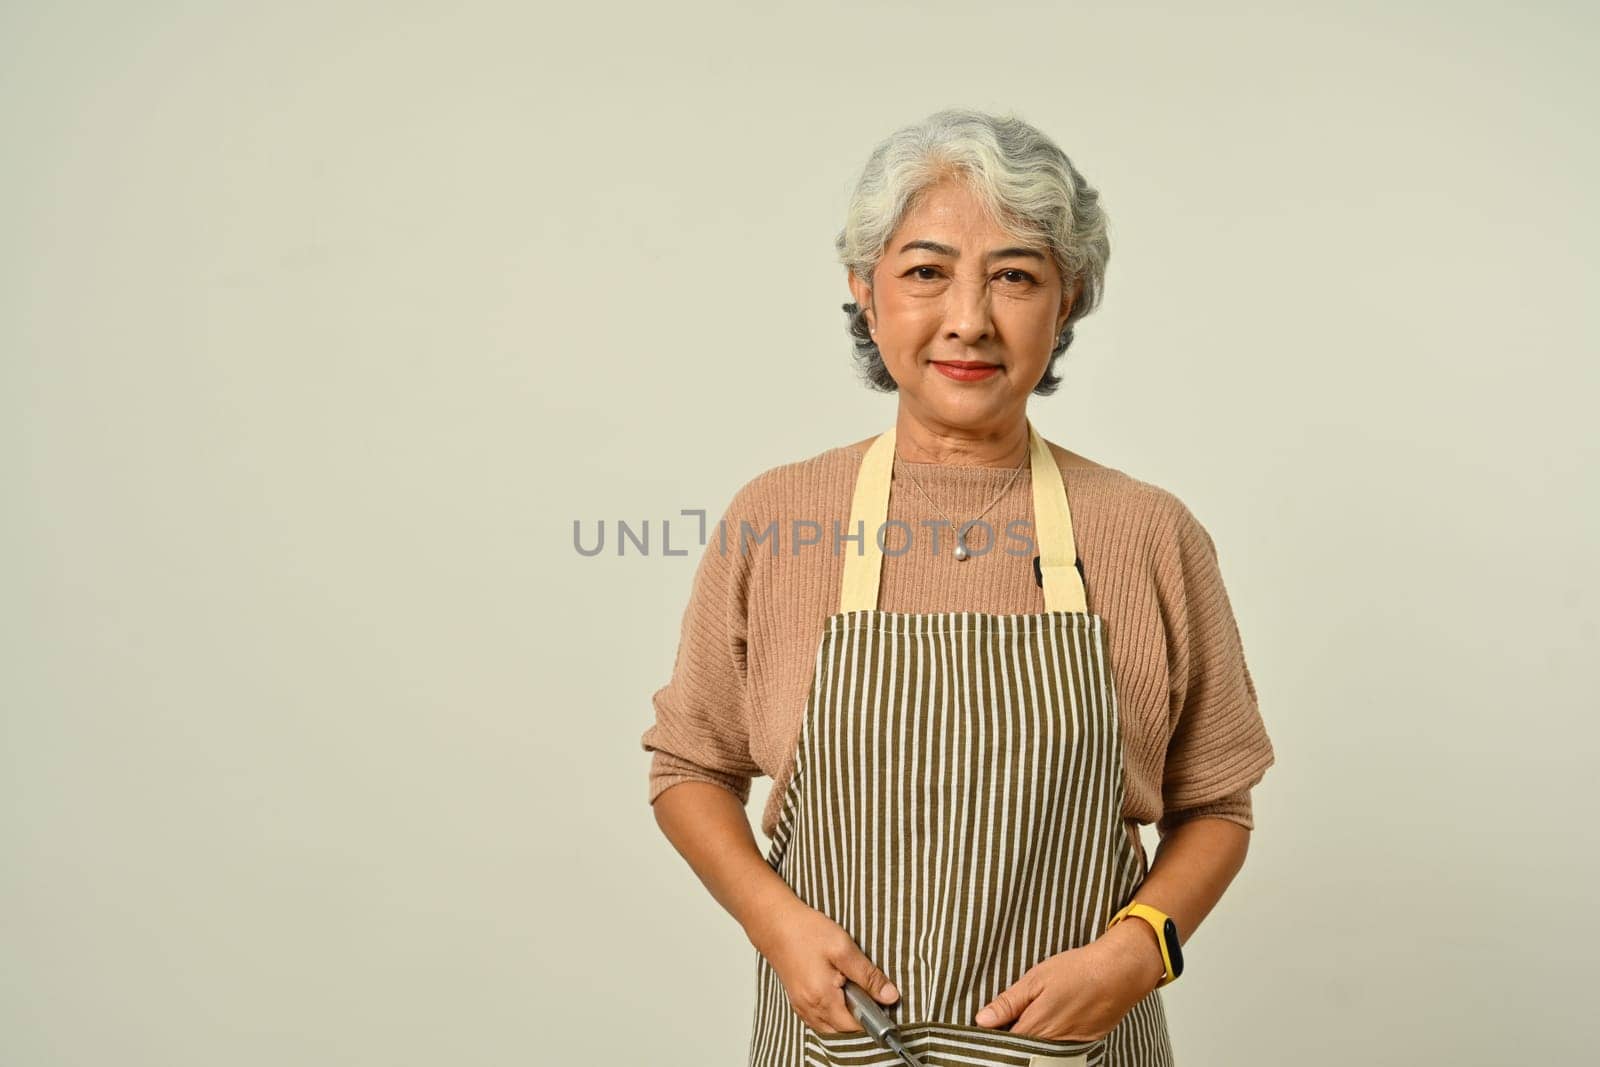 Positive grey haired woman 50s wearing apron standing isolated on gray background. People, household, small business owner concept.